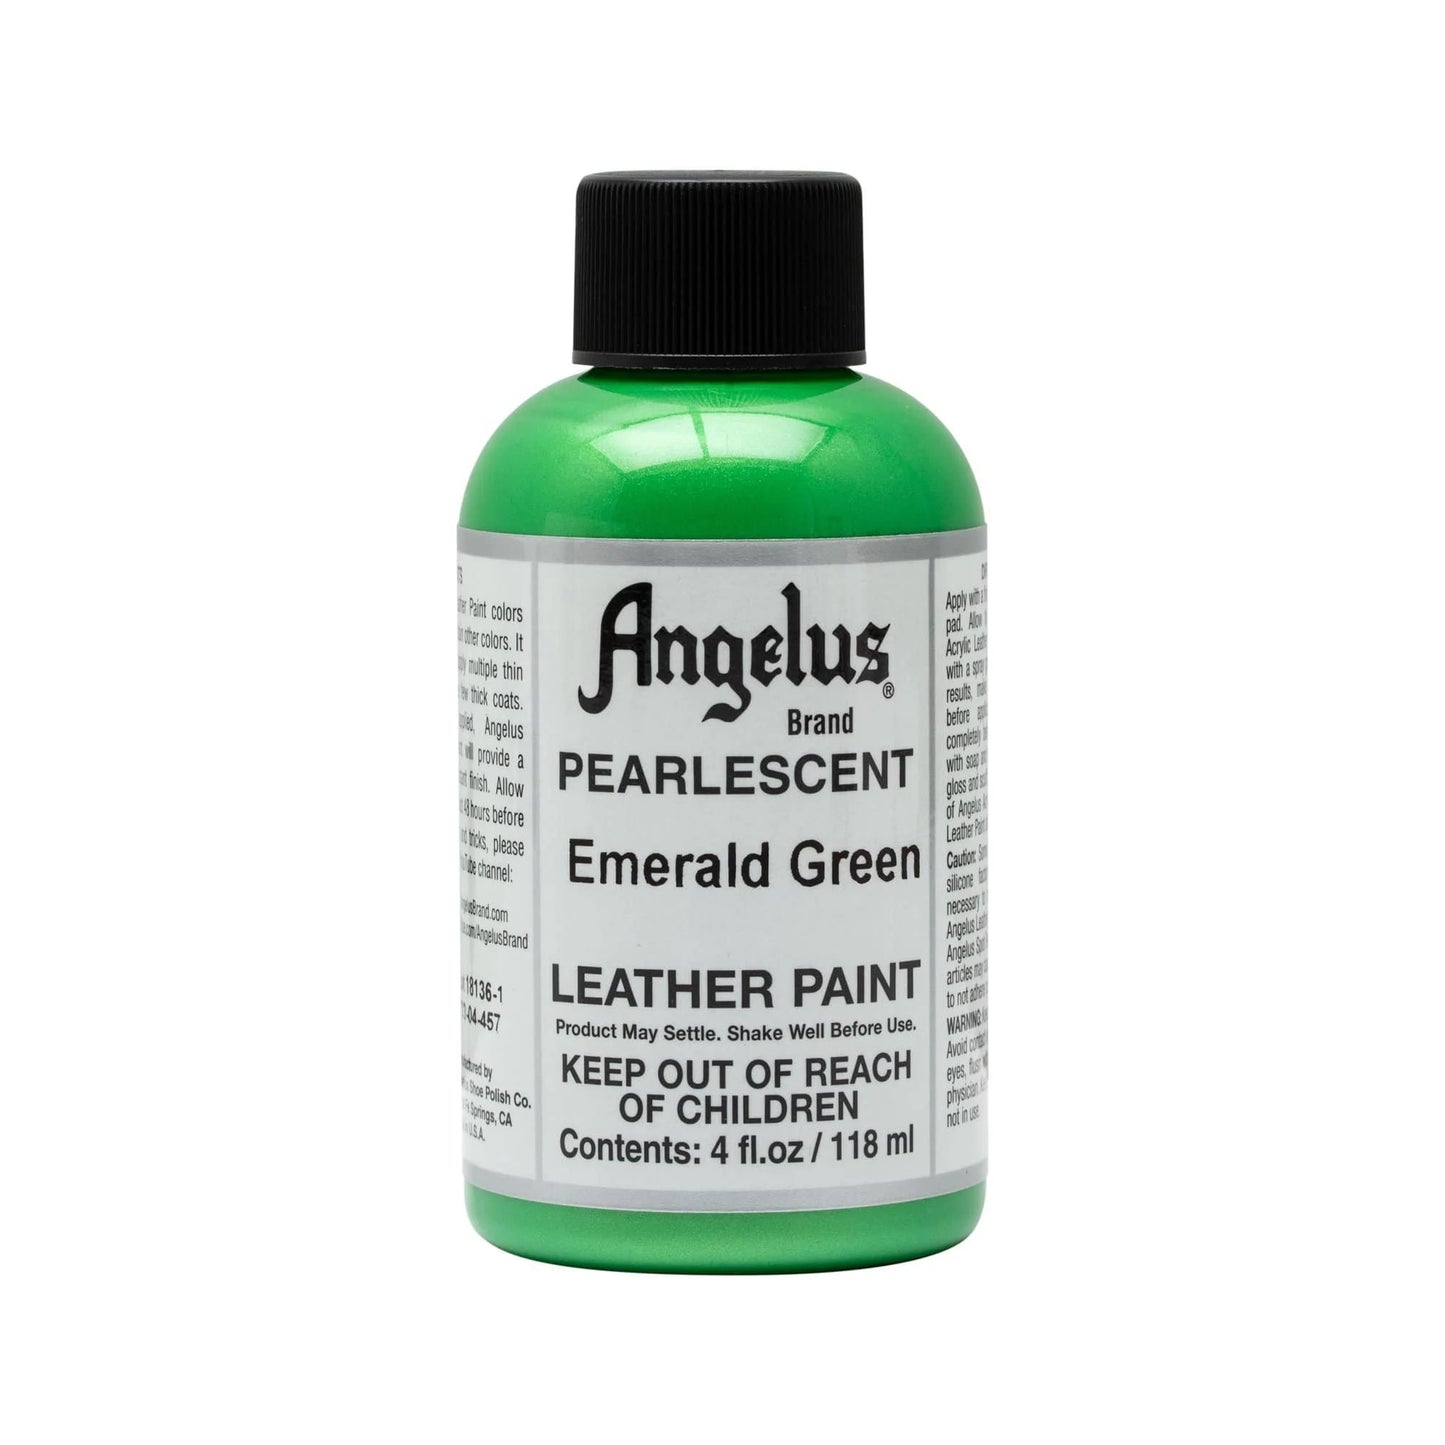 ANGELUS Acrylic Leather Paint Emerald Green Pearlescent | Mollies Make And Create NZ